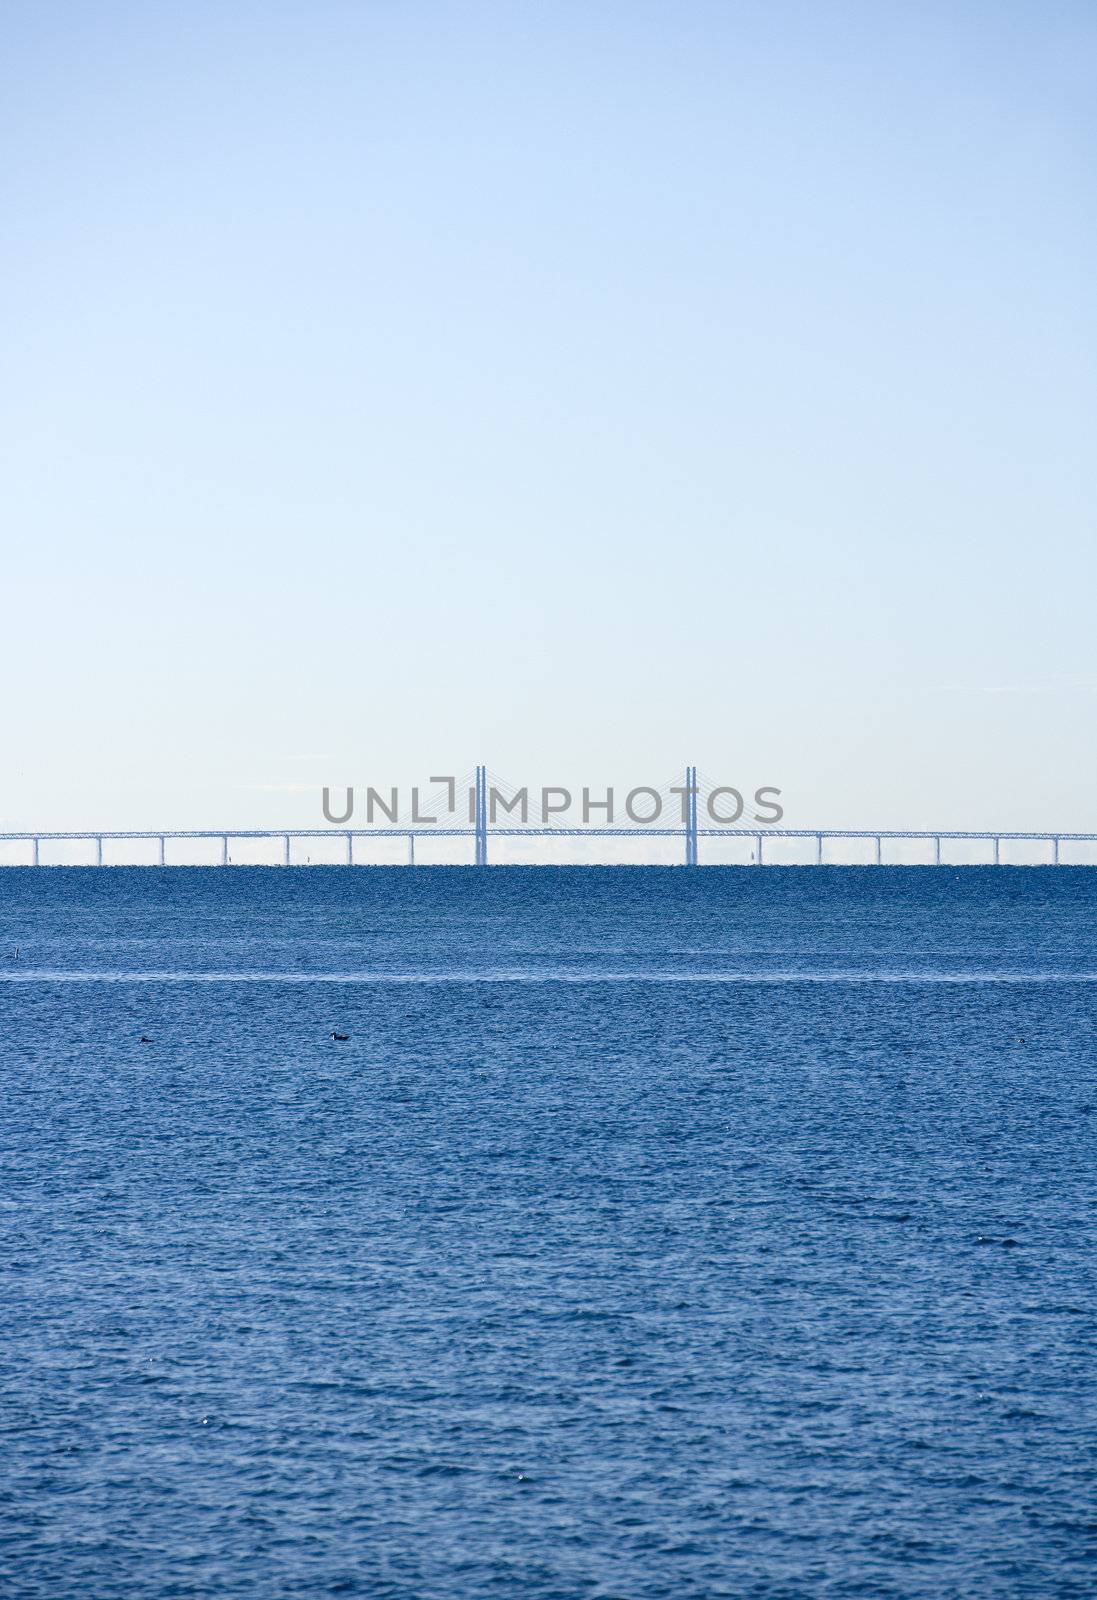 Horizon over Water on a sunny day with a bridge in the background